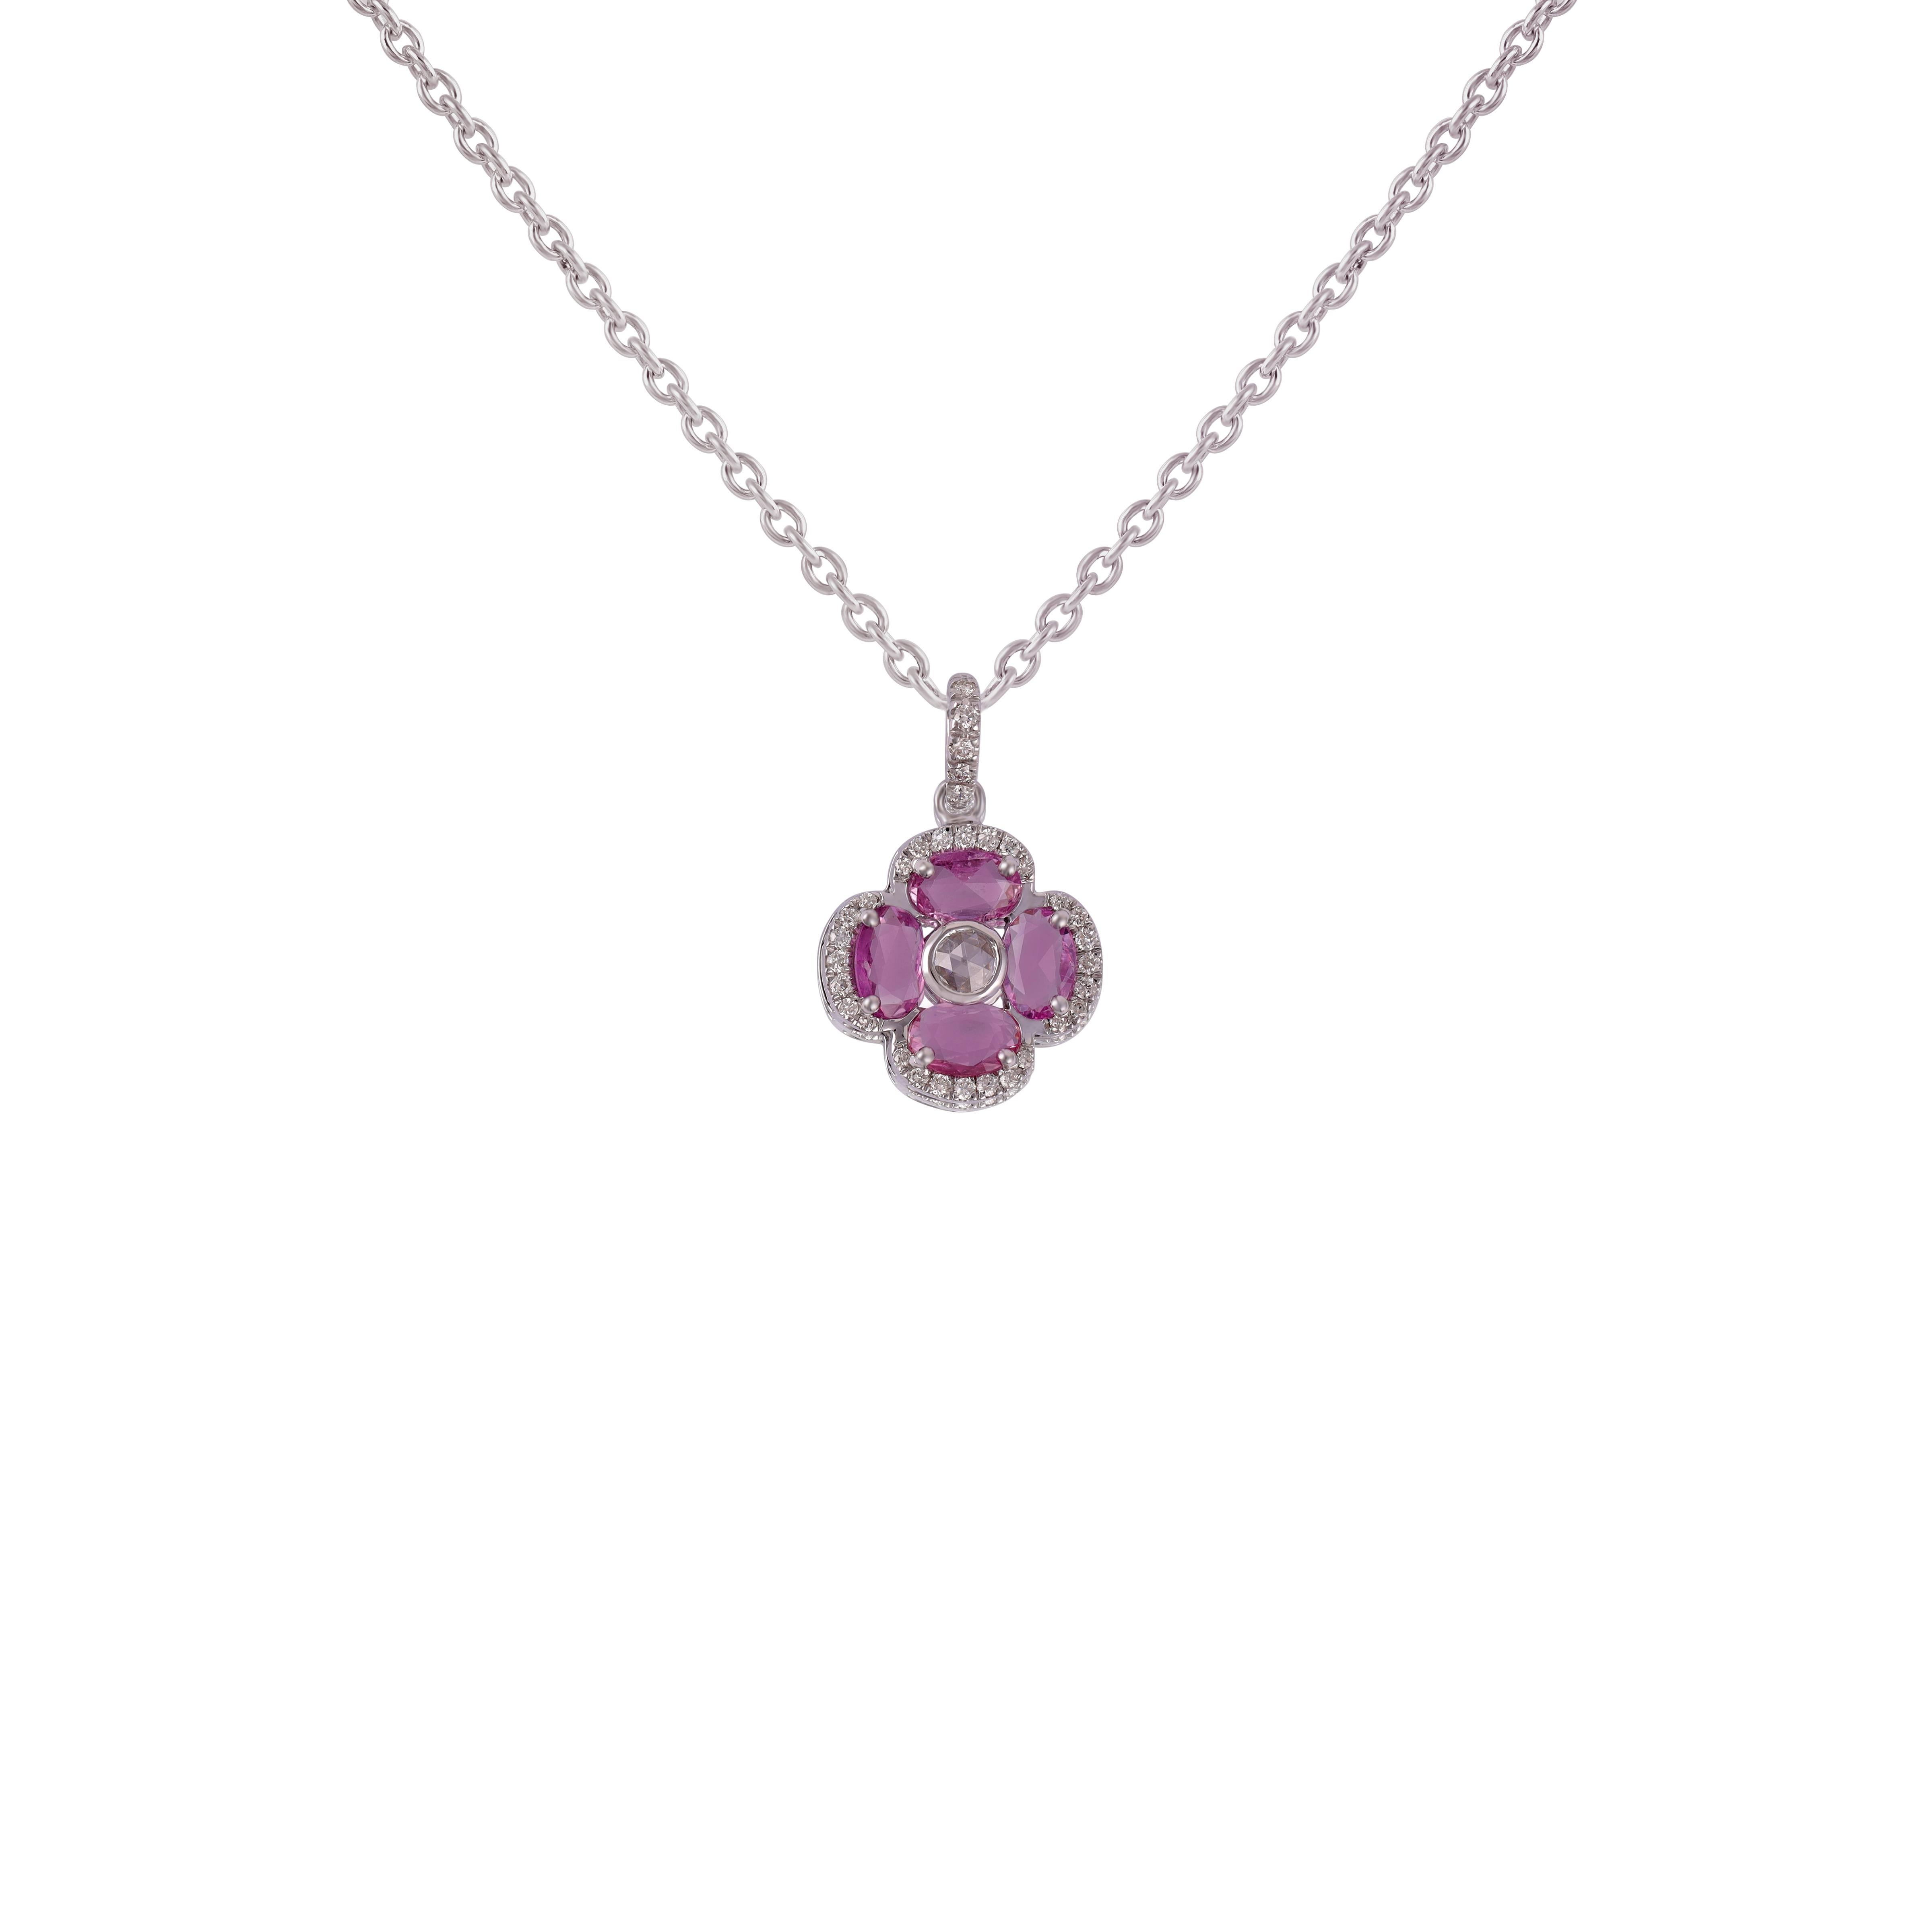 Modern 1.37 Carat Oval Cut Pink Sapphire Pendant Necklace in 18 Karat Gold with Diamond For Sale